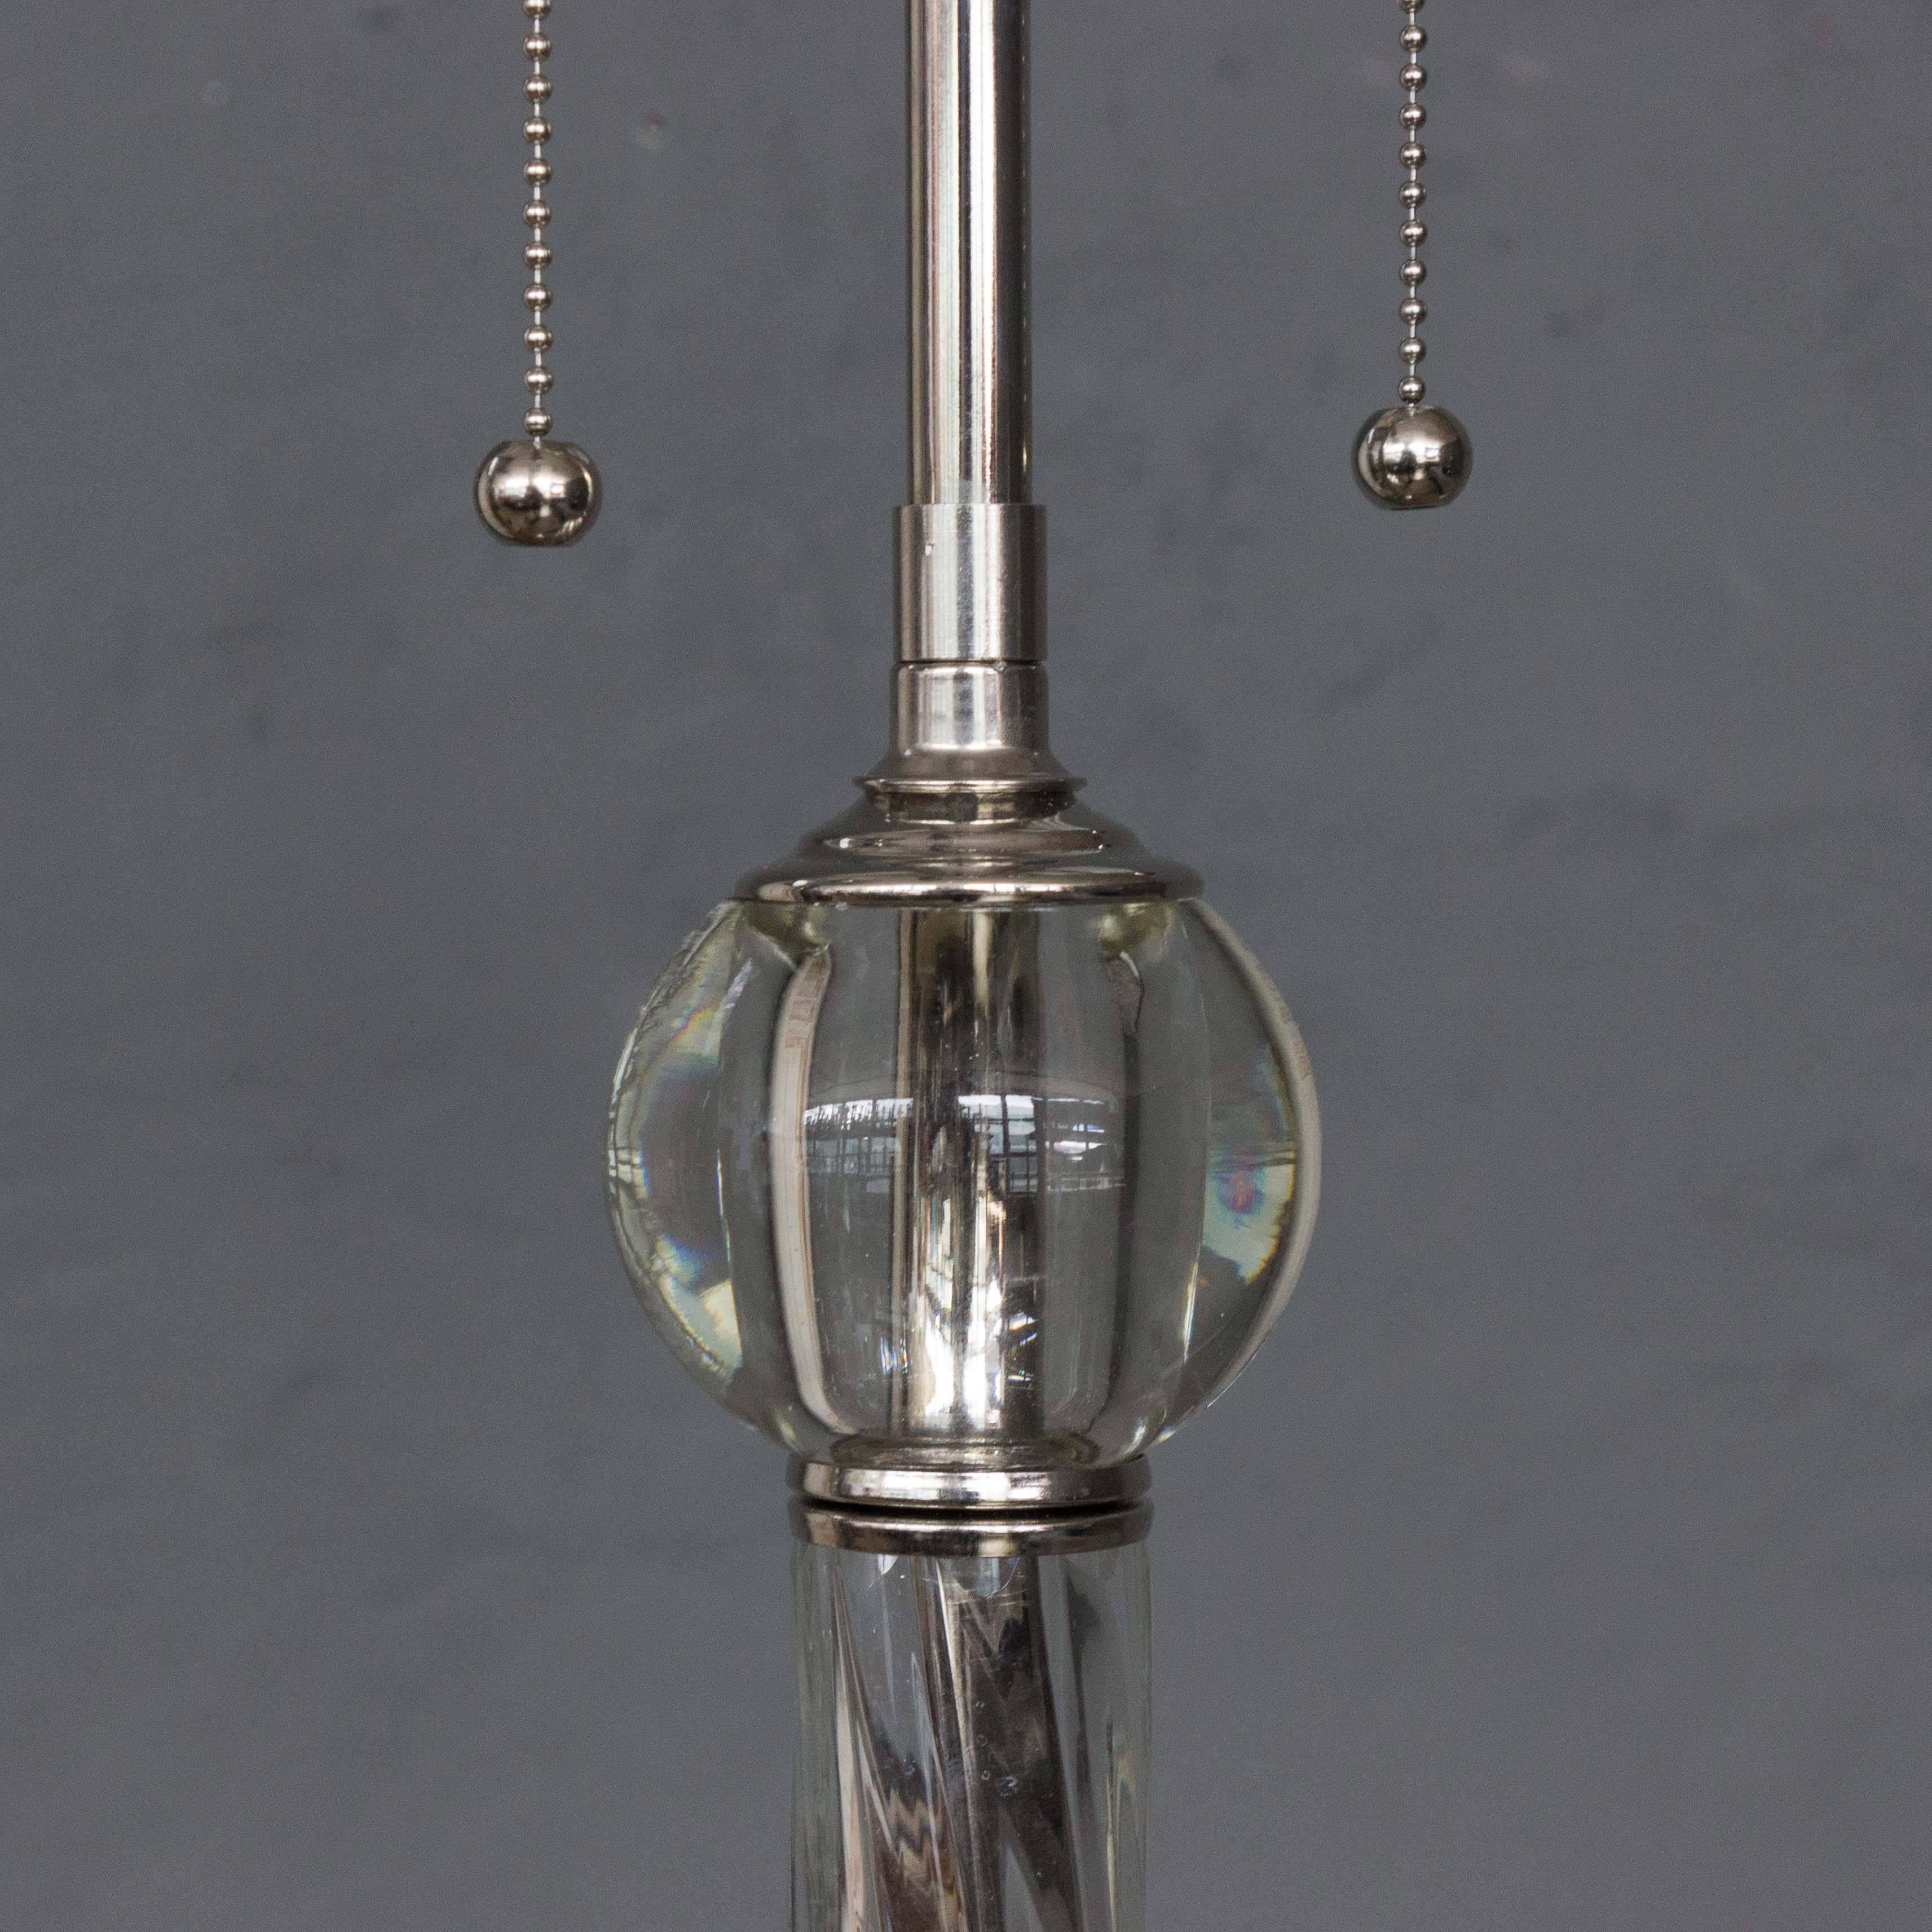 Presenting the timeless elegance of an American Art Deco style glass floor lamp from around 1938. This lamp features meticulous glass and nickel-plated components that seamlessly blend together. The lamp stands at a height of 68 inches, supported by